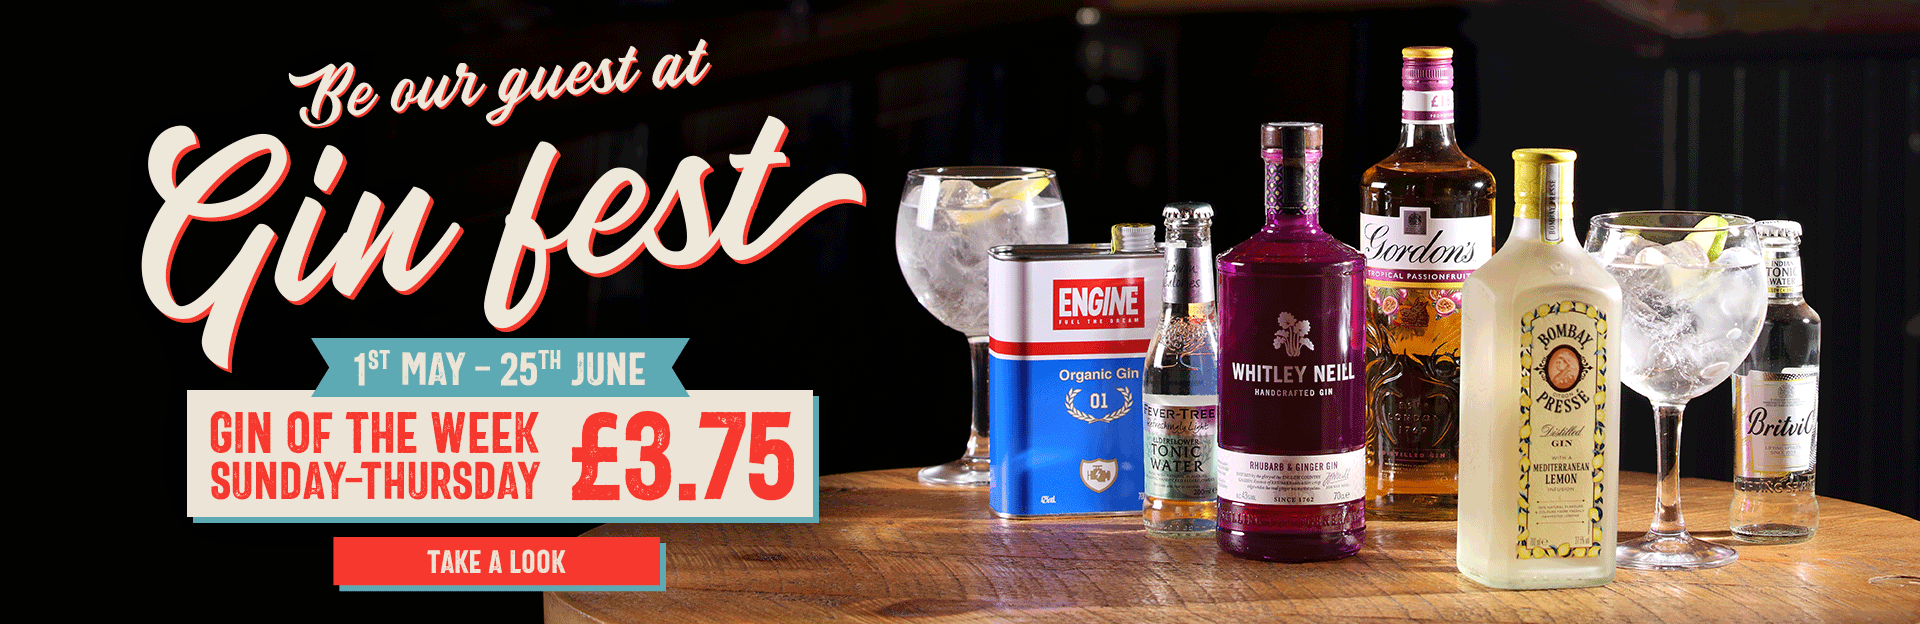 Gin Fest at The Gardeners Arms